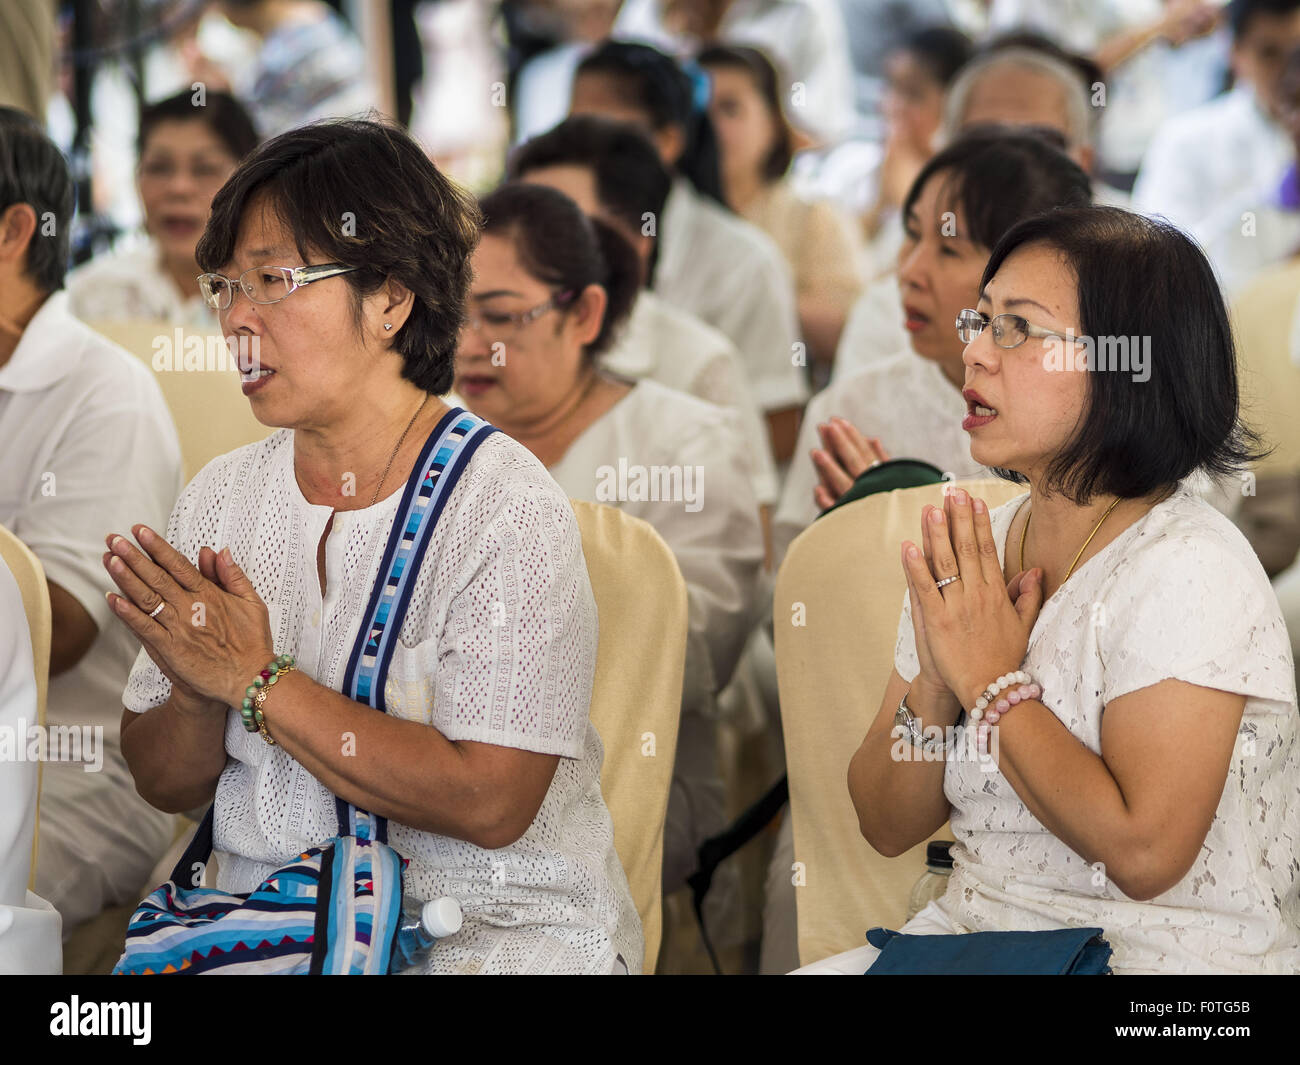 Bangkok, Thailand. 21st Aug, 2015. People pray at a Buddhist ceremony at Central World to honor the dead from the Erawan Shrine bombing. The Bangkok Metropolitan Administration (BMA) held a religious ceremony Friday for the Ratchaprasong bomb victims. The ceremony started with a Brahmin blessing at Erawan Shrine, which was the target of a bombing Monday night. After the blessing people went across the street to the plaza in front of Central World mall for an interfaith religious service. Credit:  ZUMA Press, Inc./Alamy Live News Stock Photo